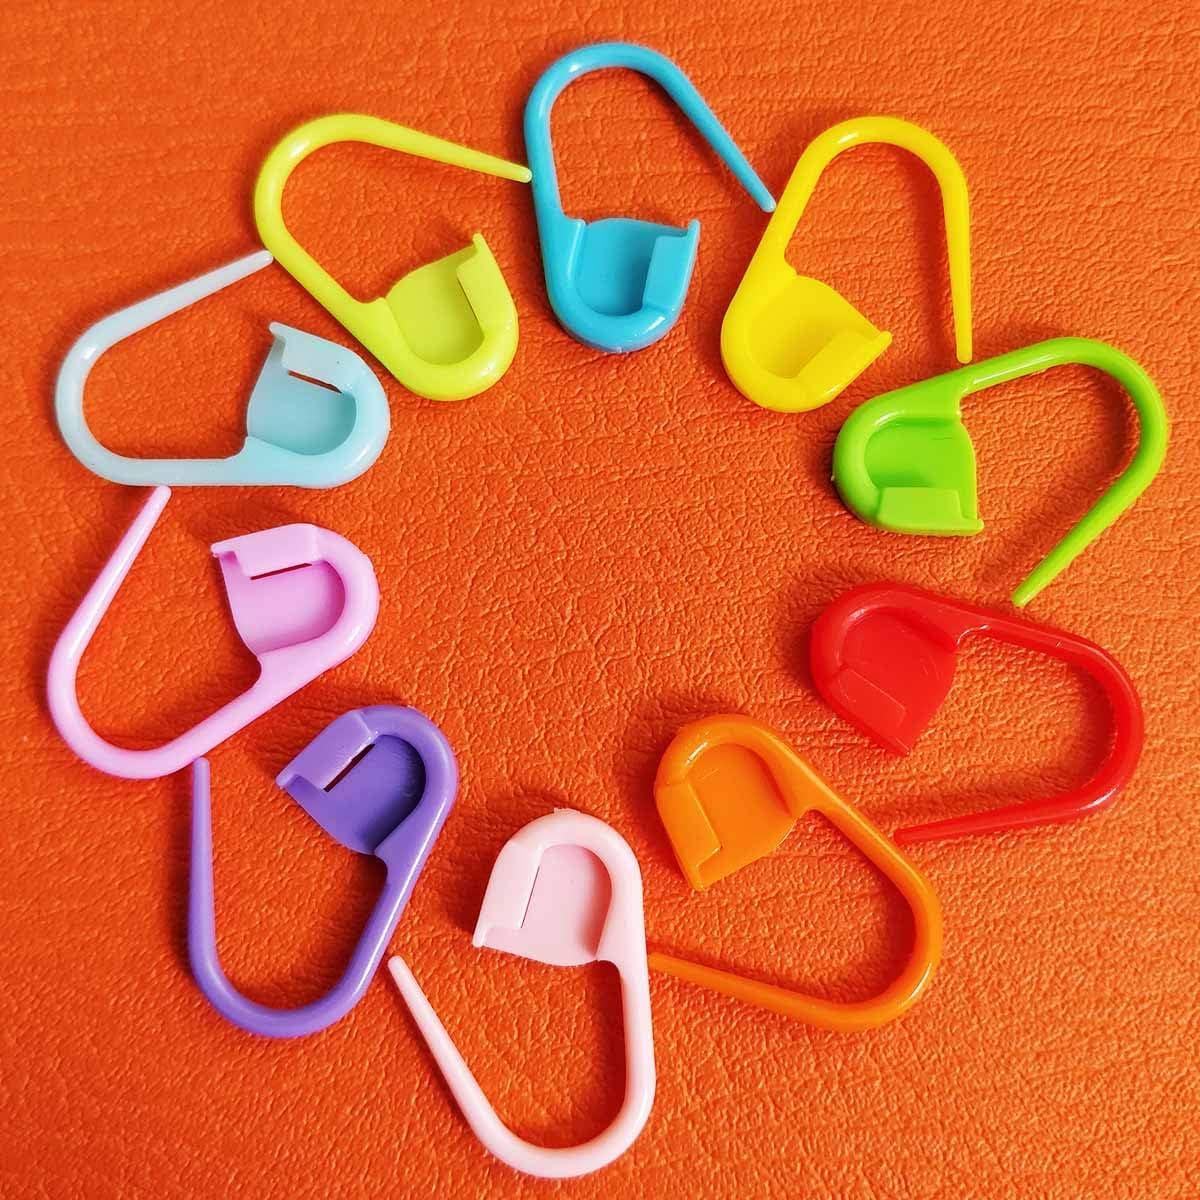 Filan 100 Pieces Locking Stitch Markers Assorted Color Knitting Stitch Counter Crochet Stitch Needle Clip Plastic Safety Pin